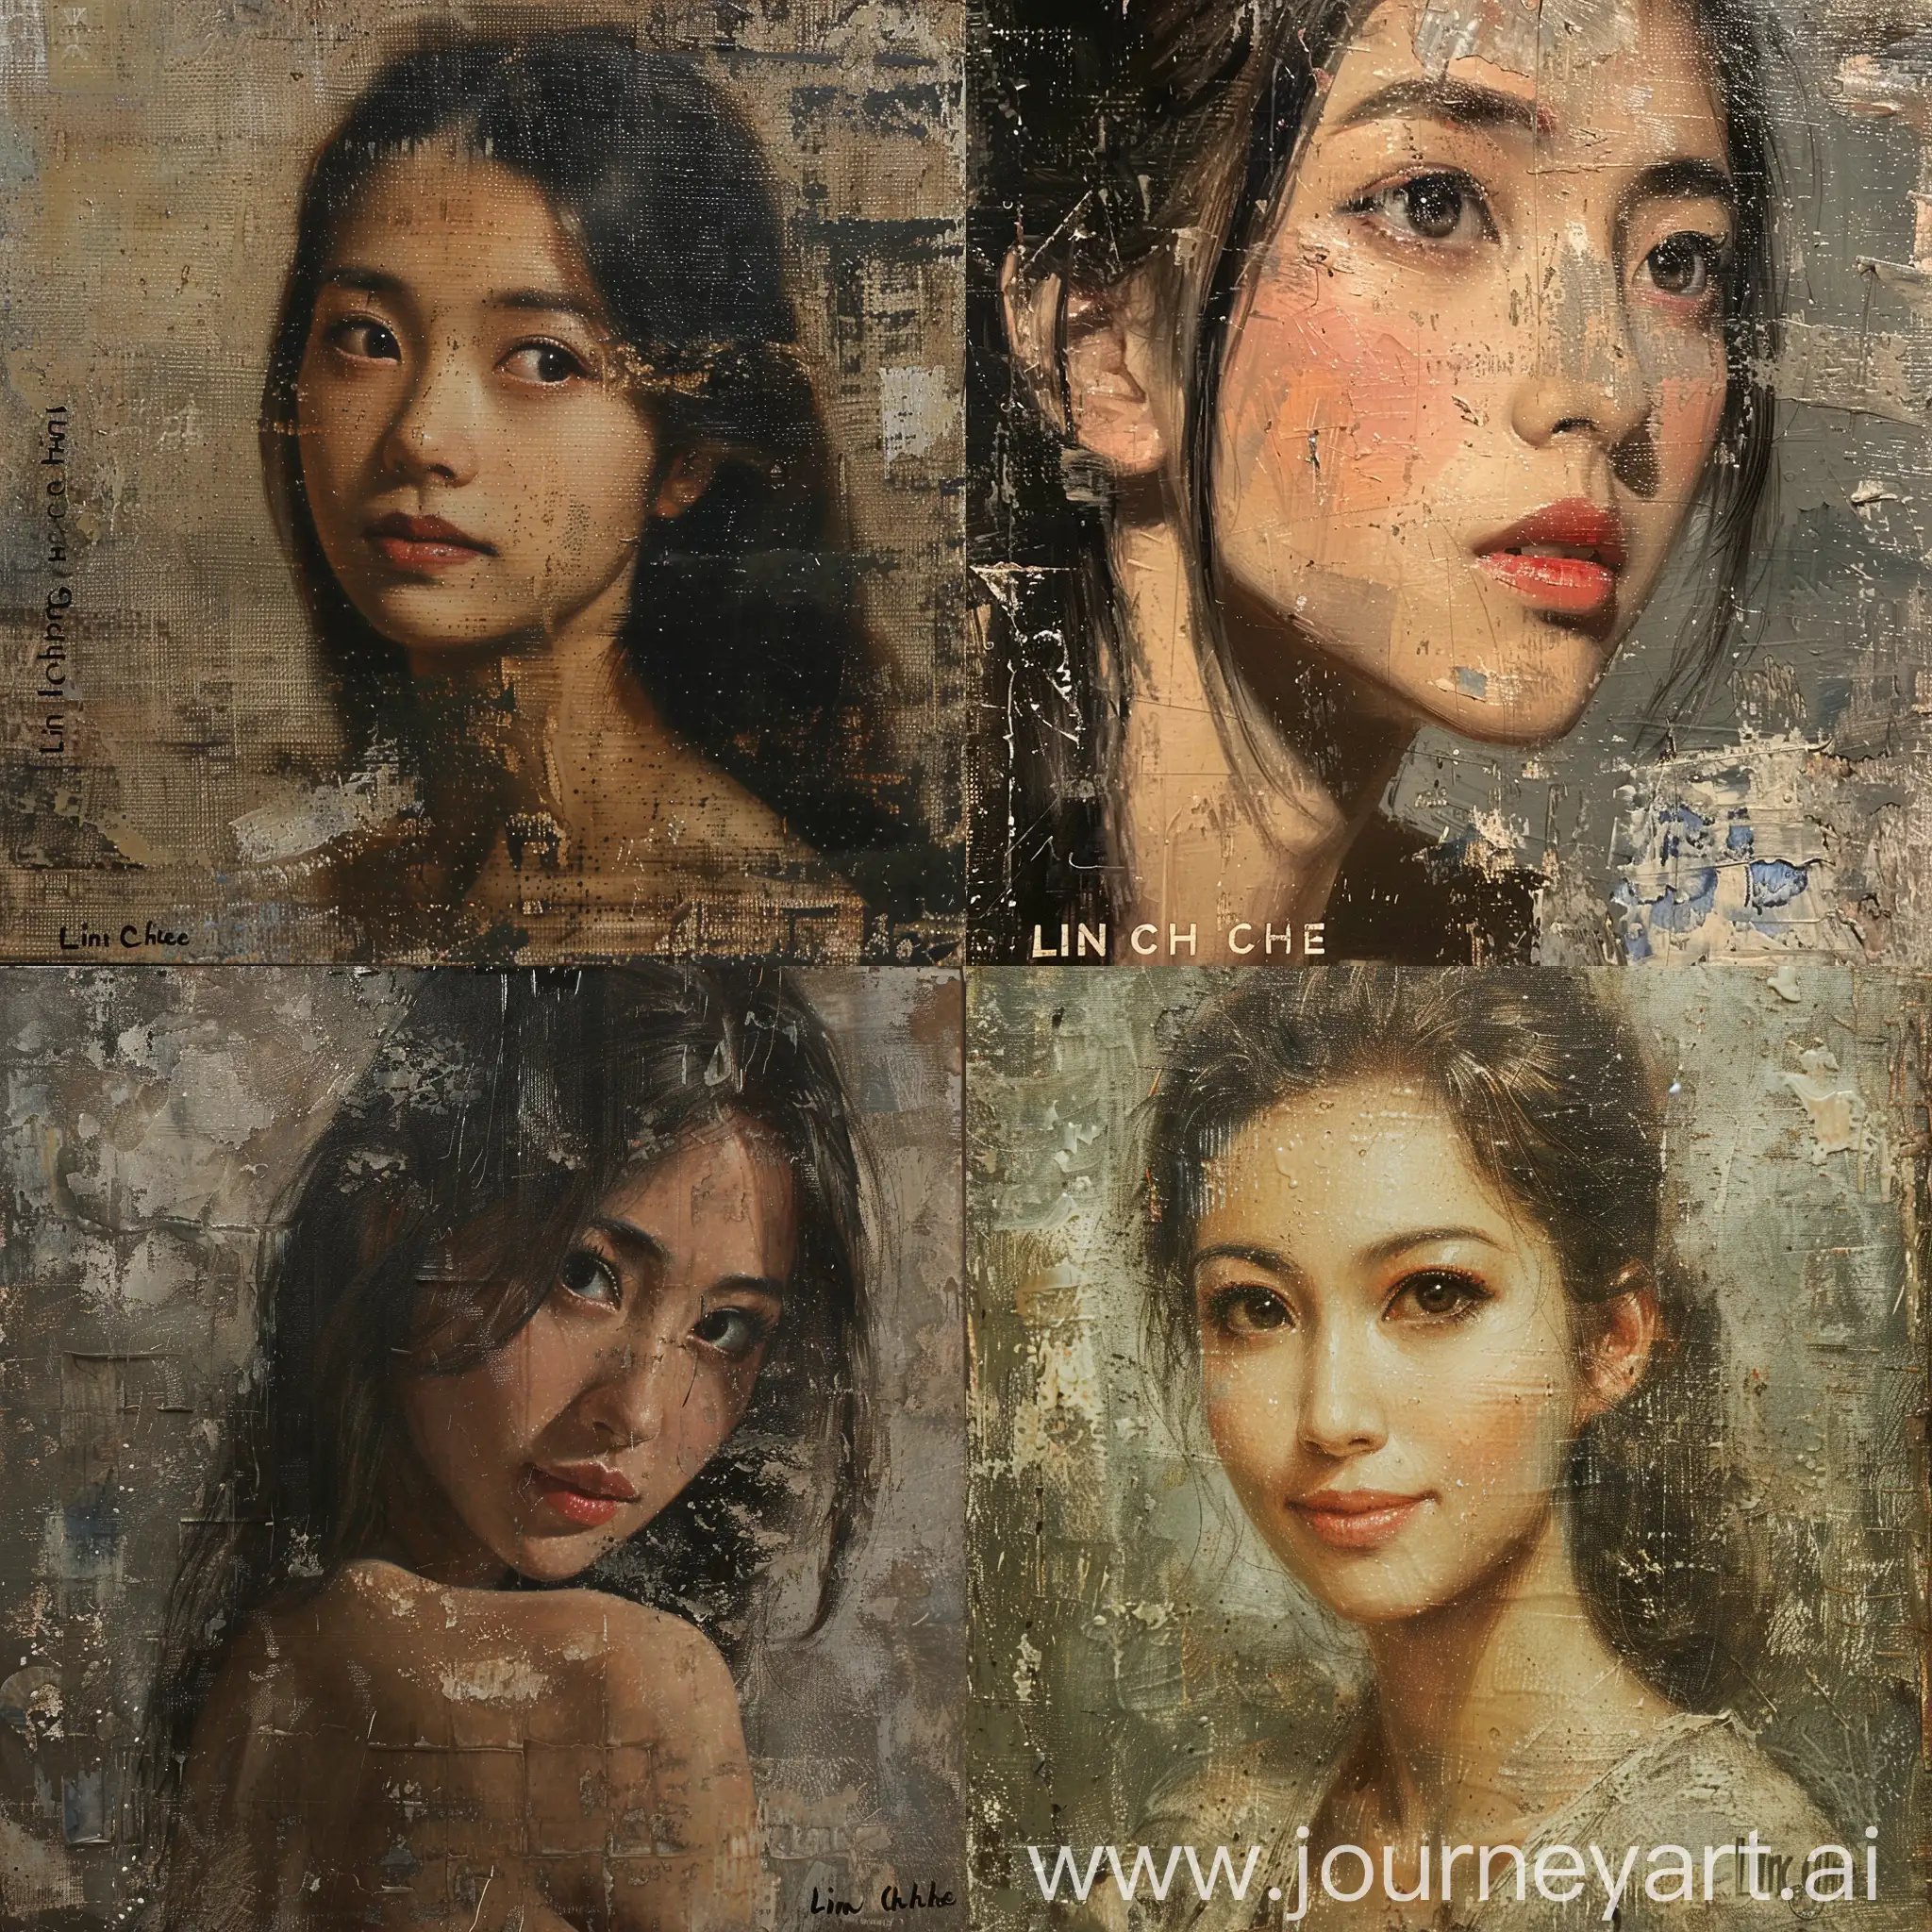 Vintage-Oil-Portrait-of-a-30YearOld-Woman-on-Aged-Canvas-by-Lin-Ching-Che